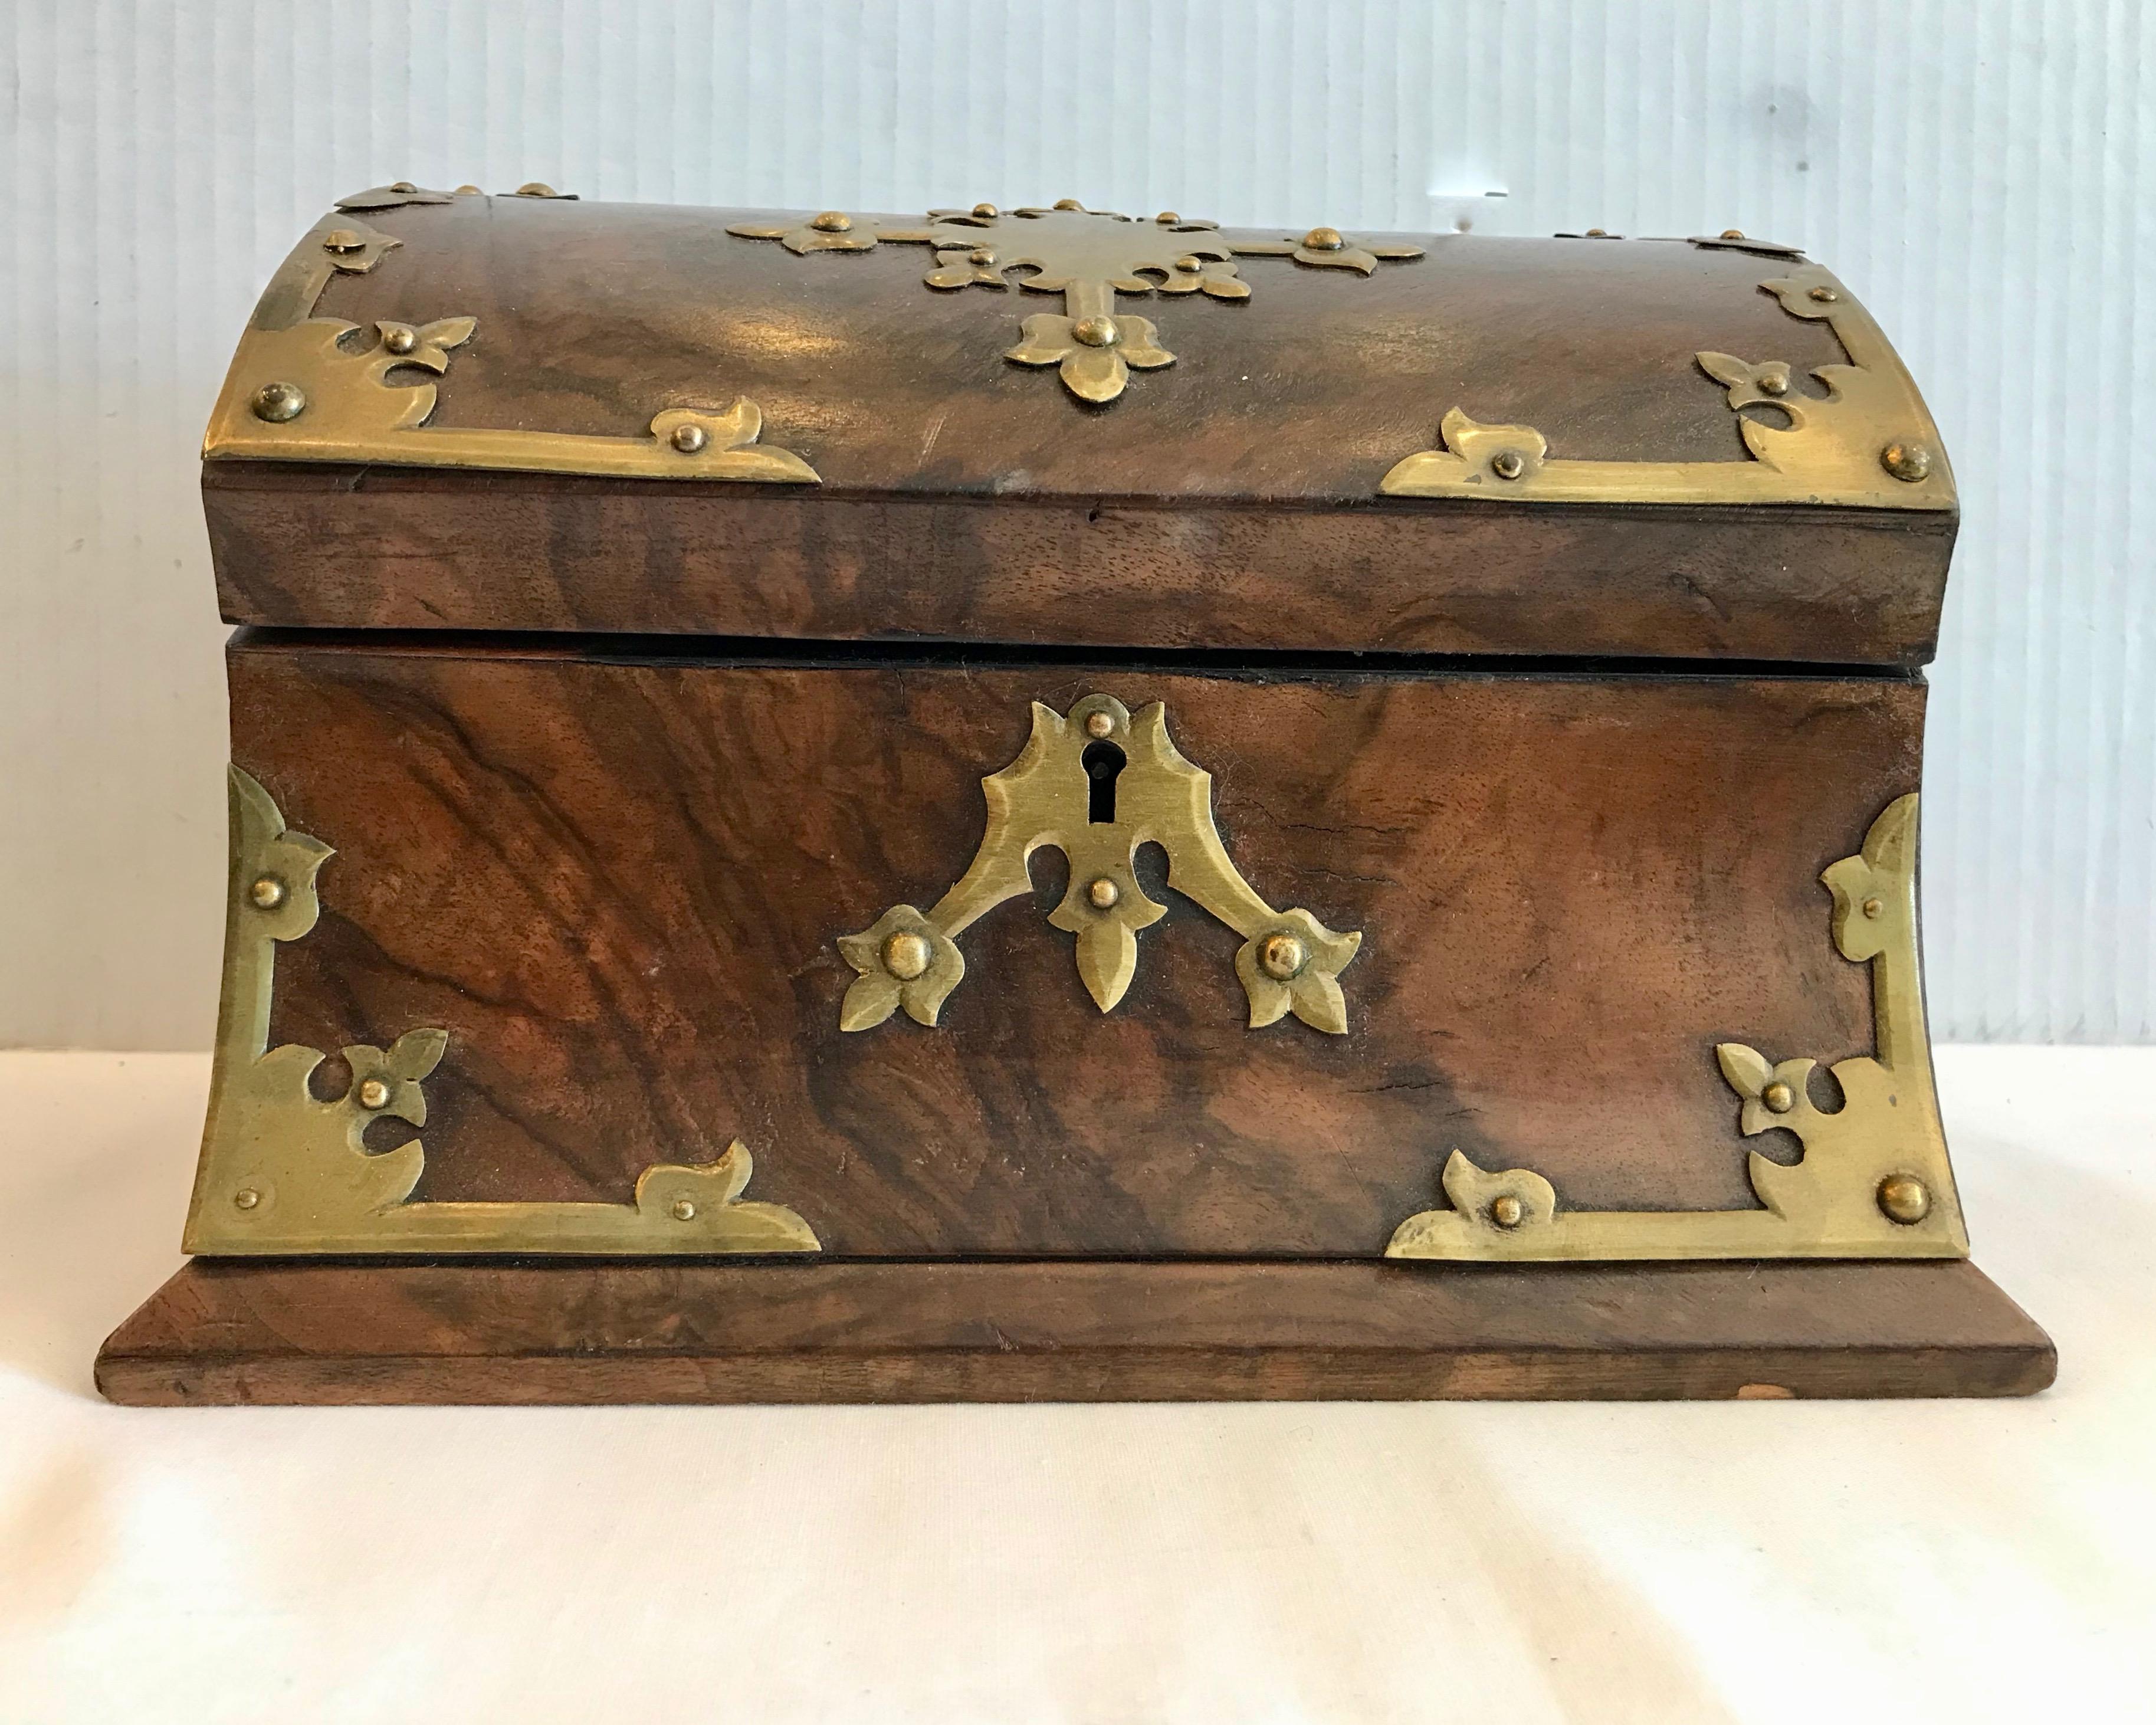 Superb quality with elaborate brass applied accents.
It is fashioned with burl walnut veneers and the interior is fitted slots for mail.